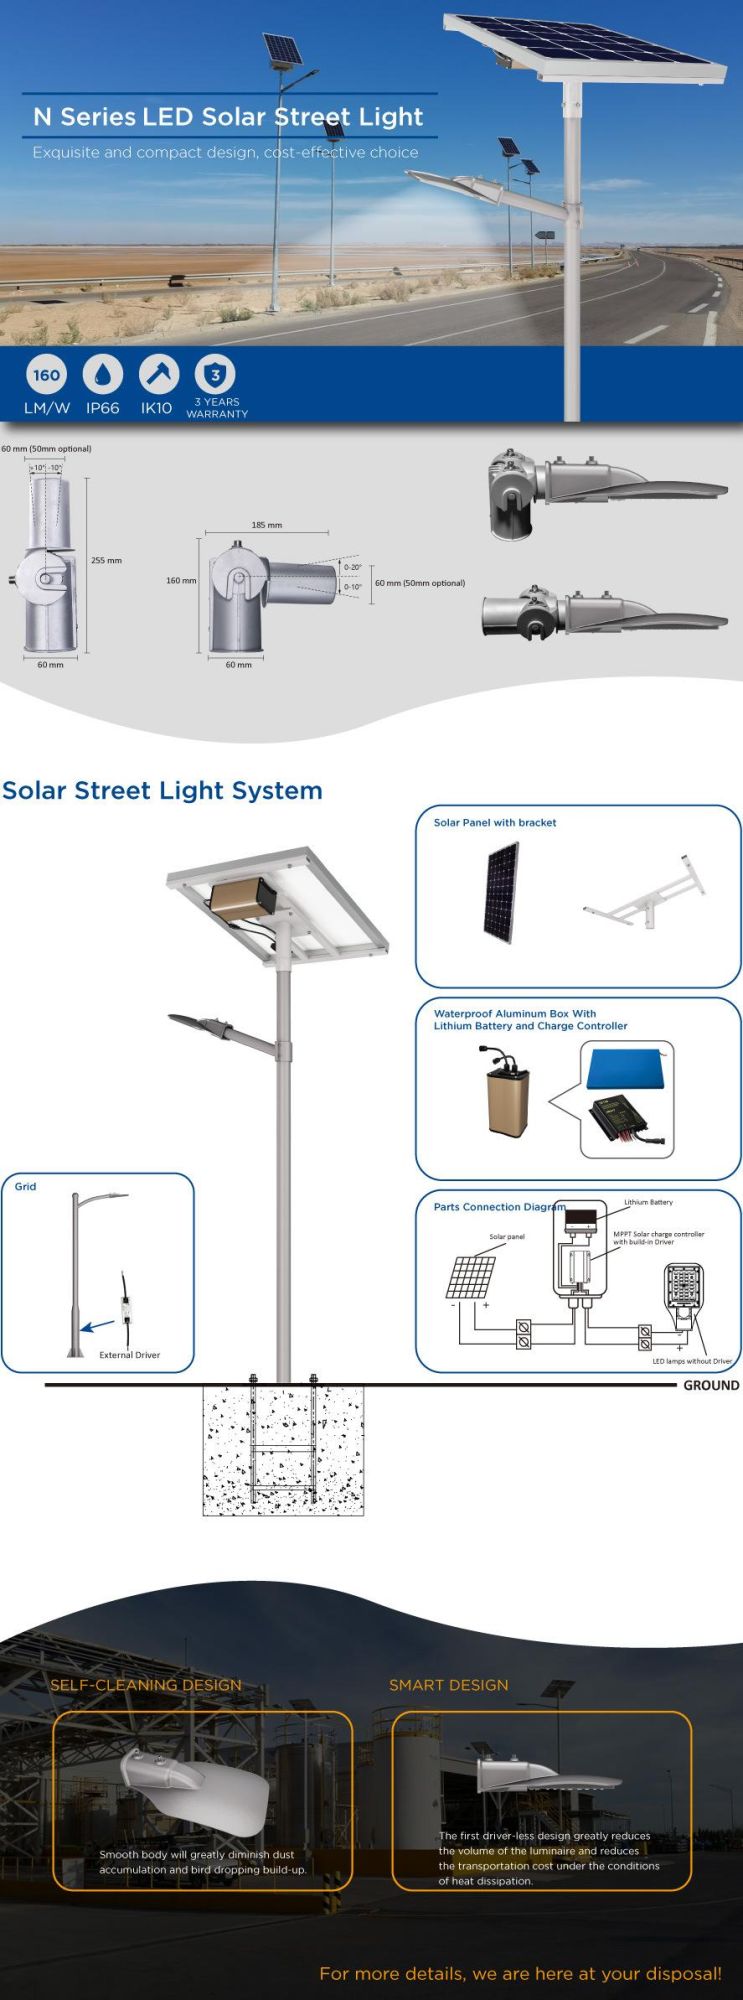 China Suppliers Waterproof Solar LED Outdoor Street Light Lights